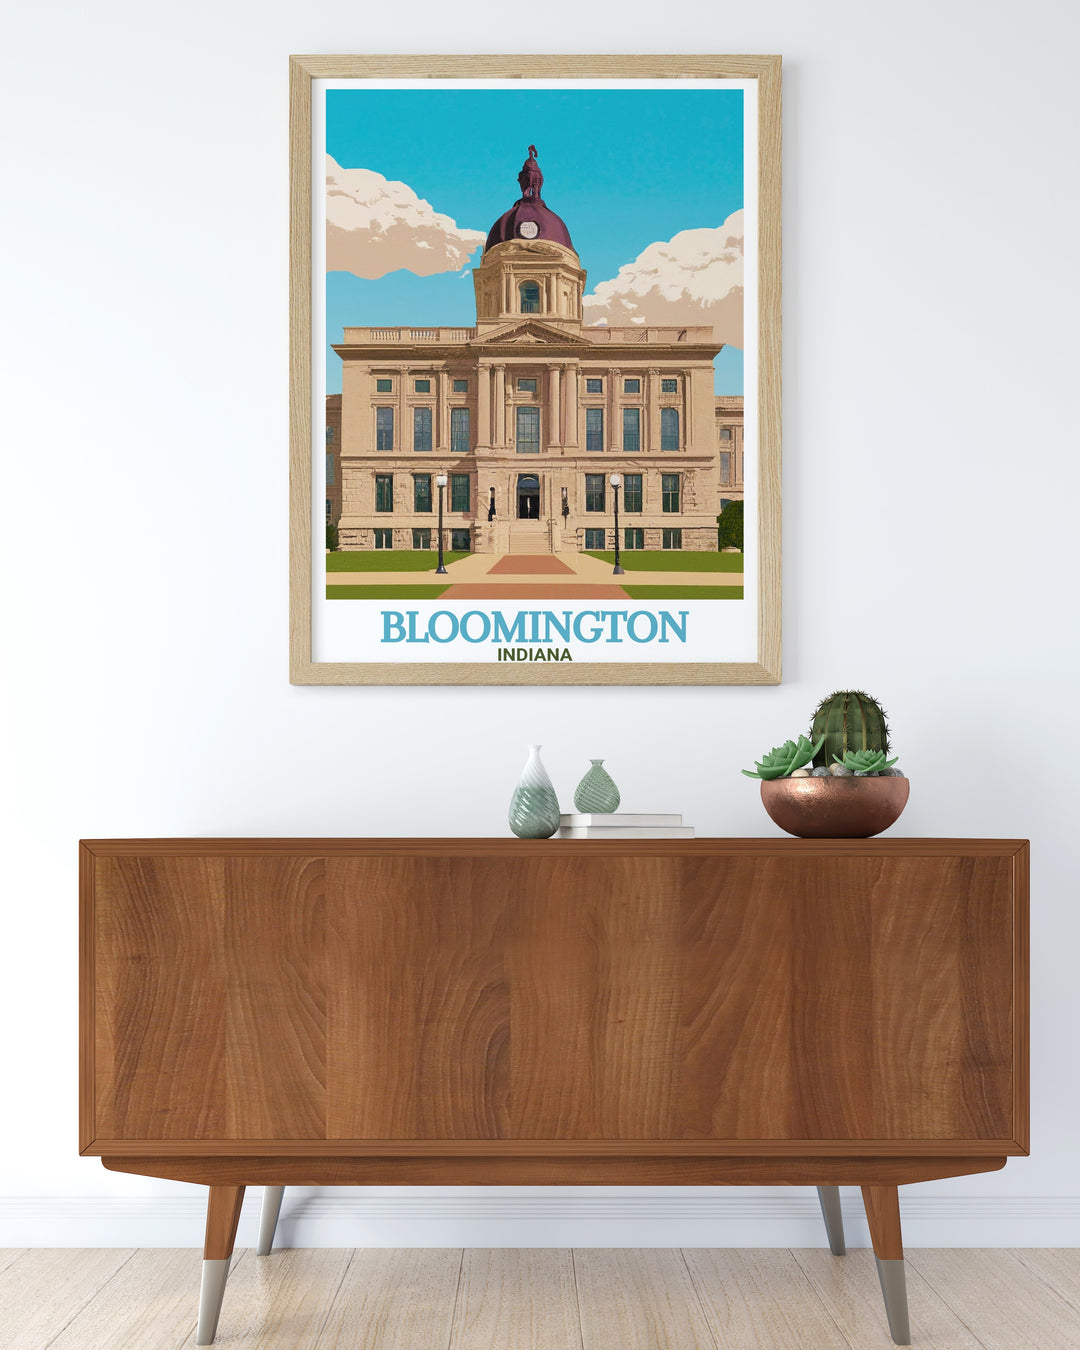 Personalized Bloomington Indiana gift featuring the Monroe County Courthouse perfect for birthdays anniversaries or special occasions offering a unique and meaningful present for loved ones